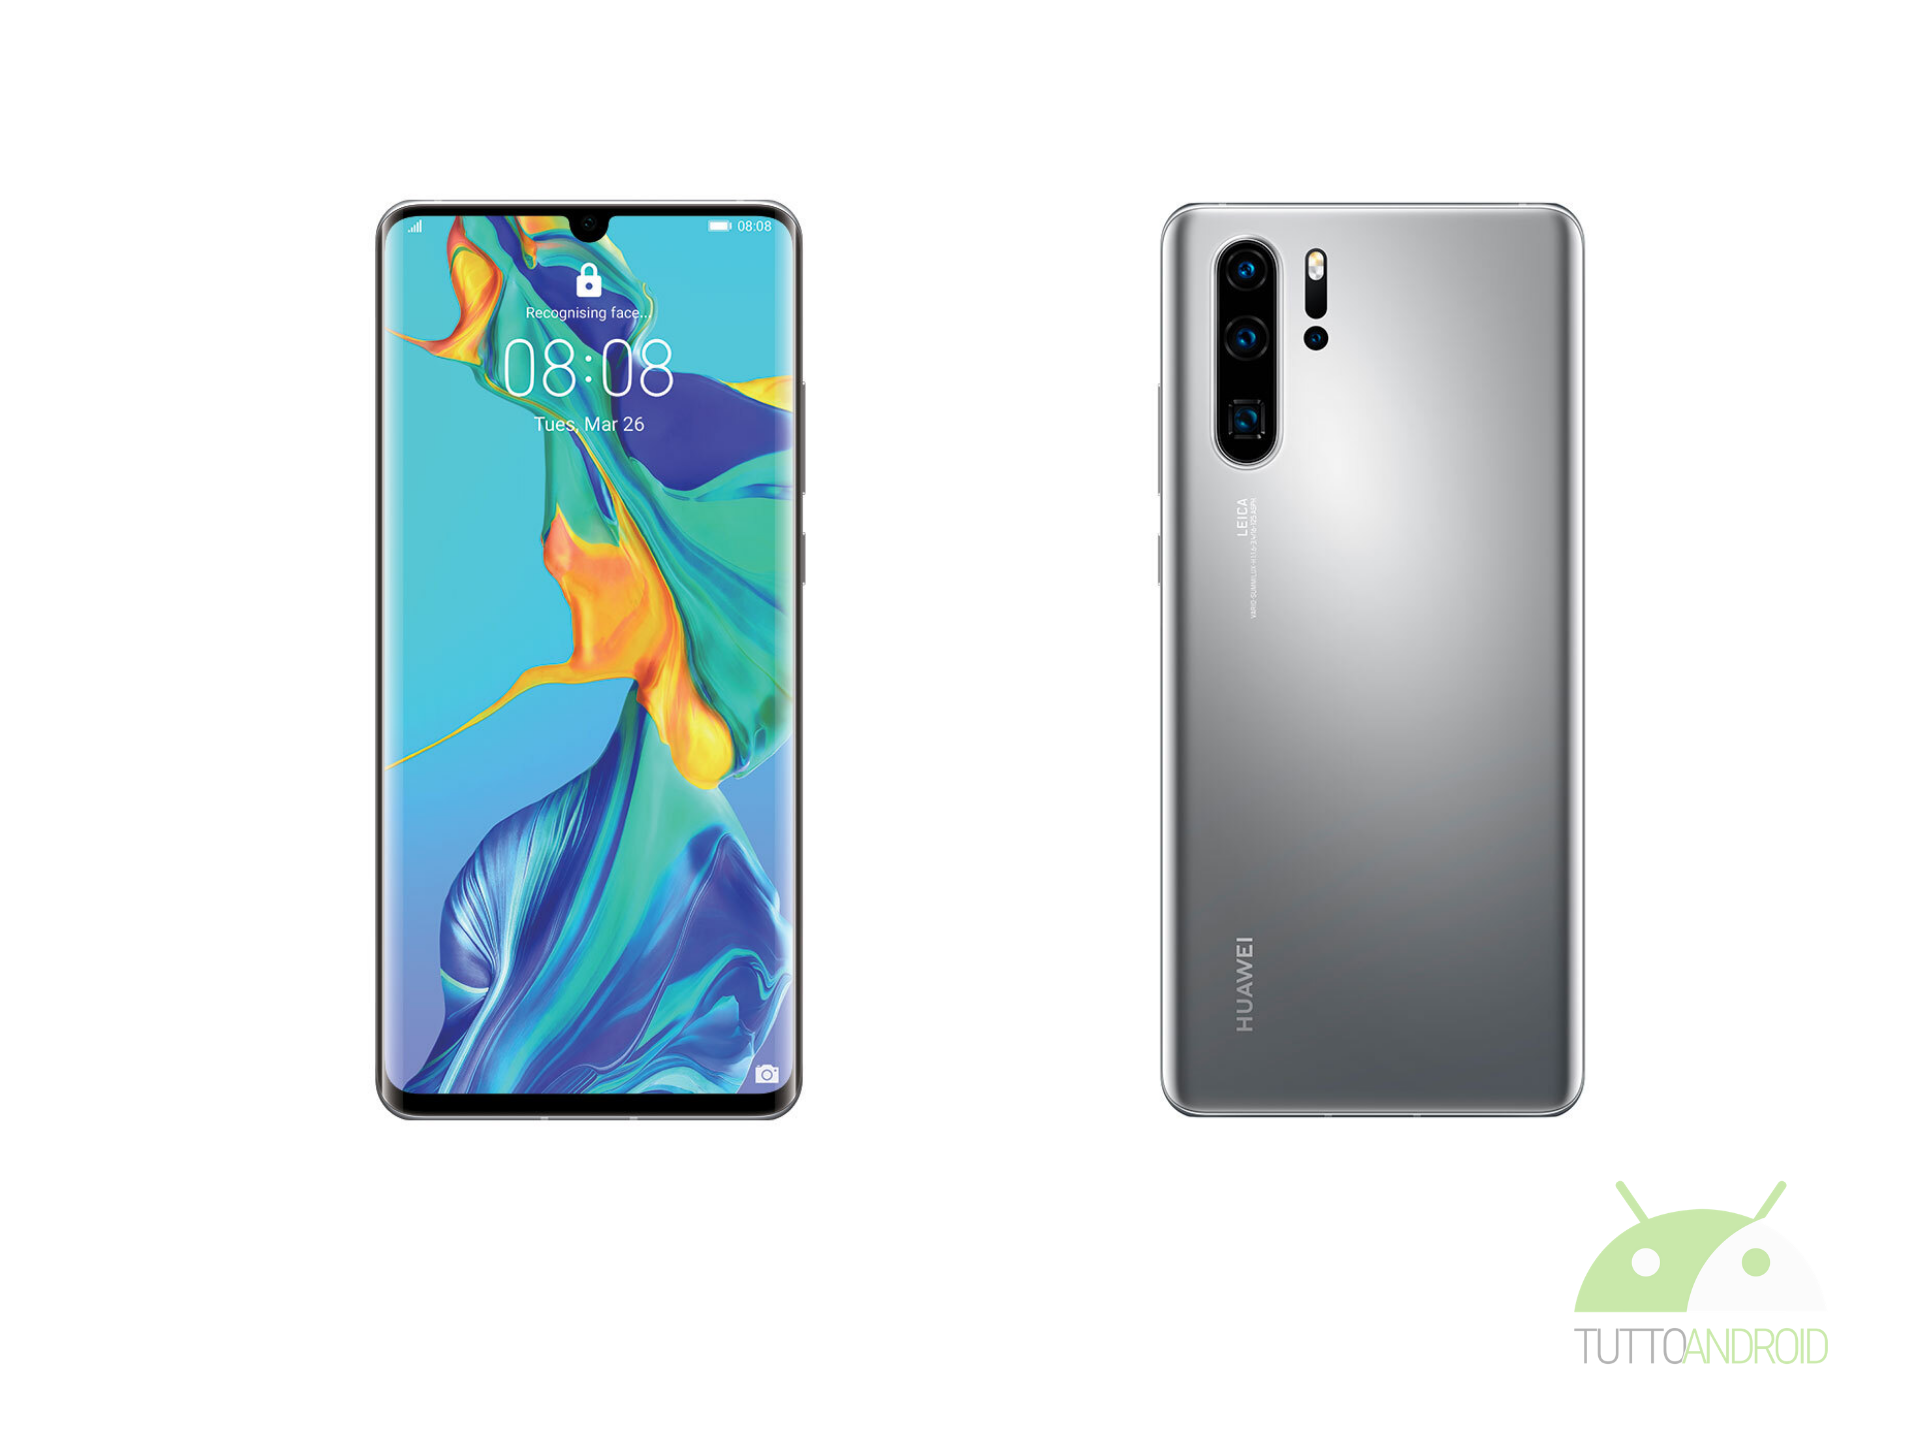 Huawei p30 new edition. Huawei p30 Pro New Edition.